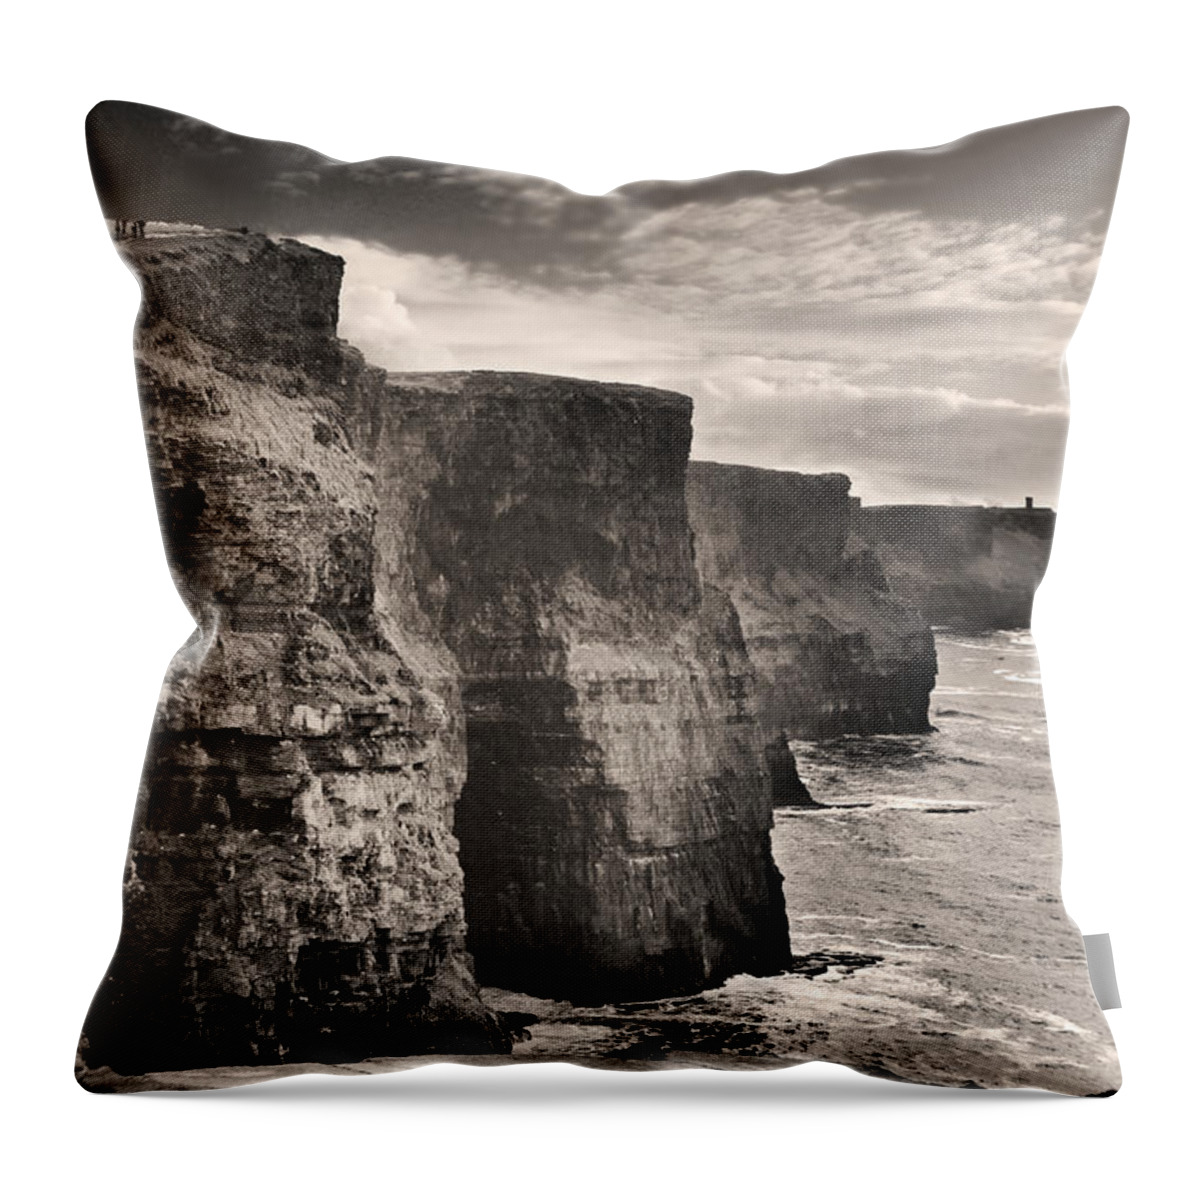 Moher Cliffs Throw Pillow featuring the photograph The Cliffs of Moher by Robert Lacy